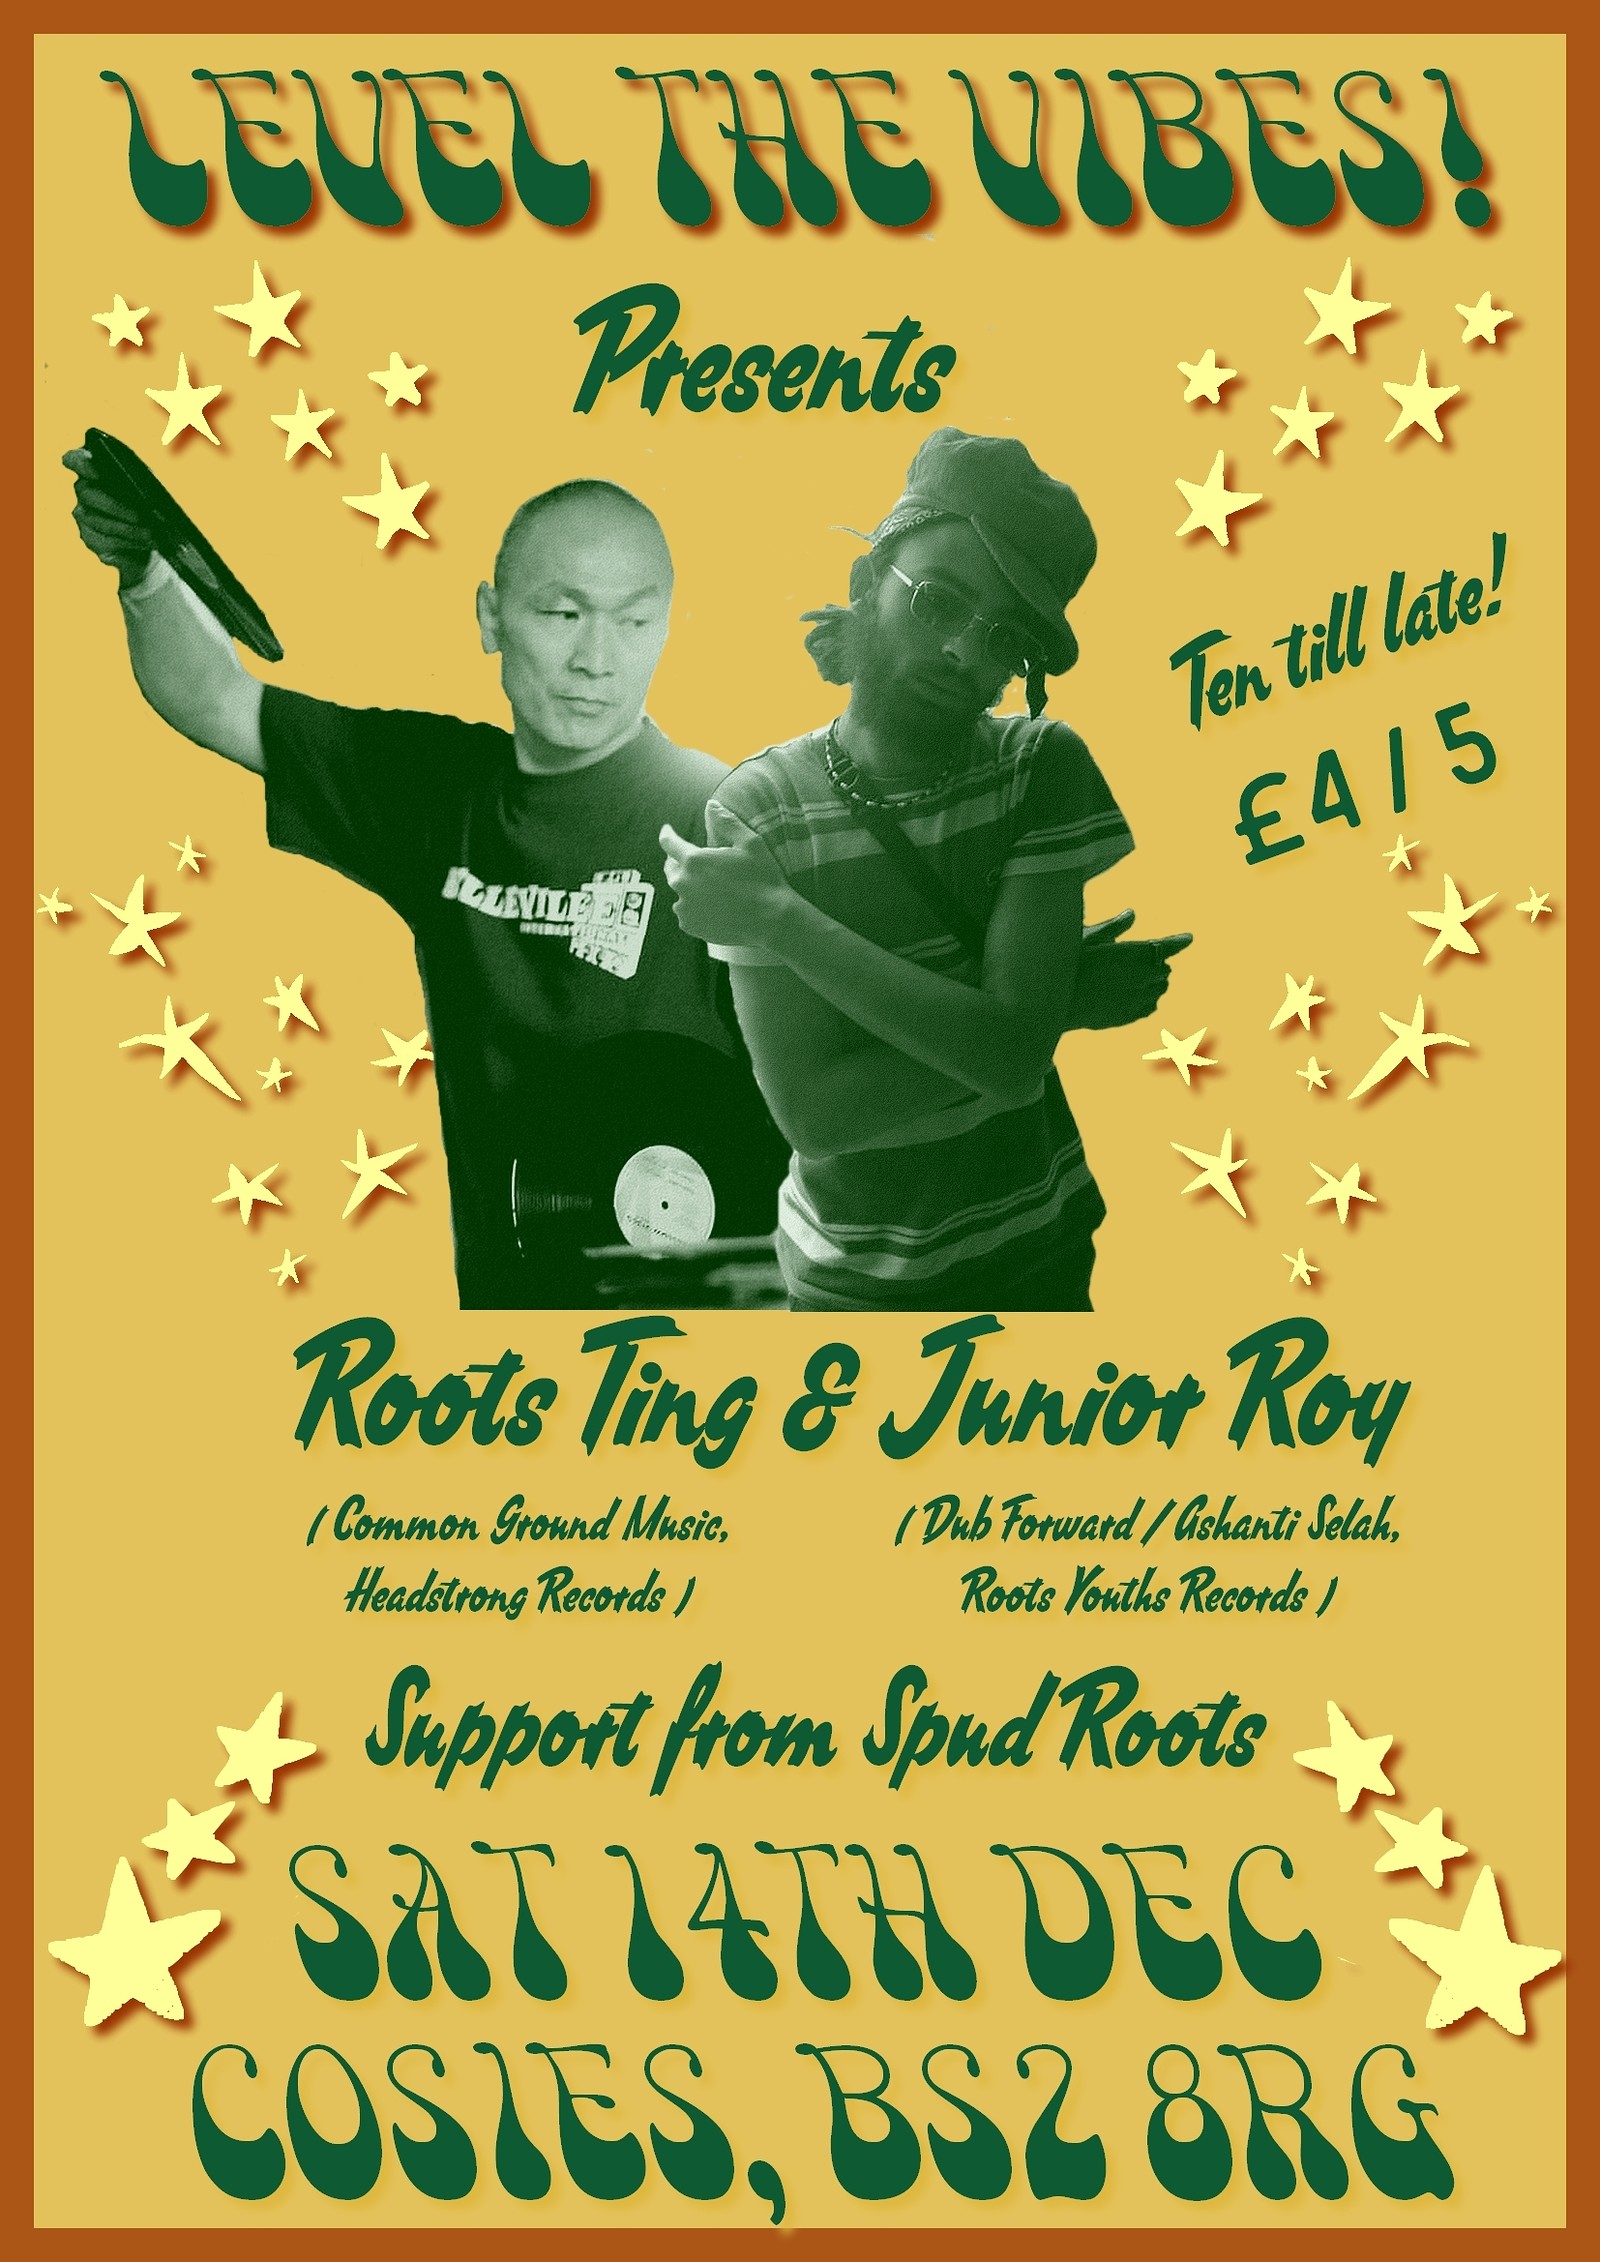 Level the Vibes w/ Roots Ting & Junior Roy at Cosies